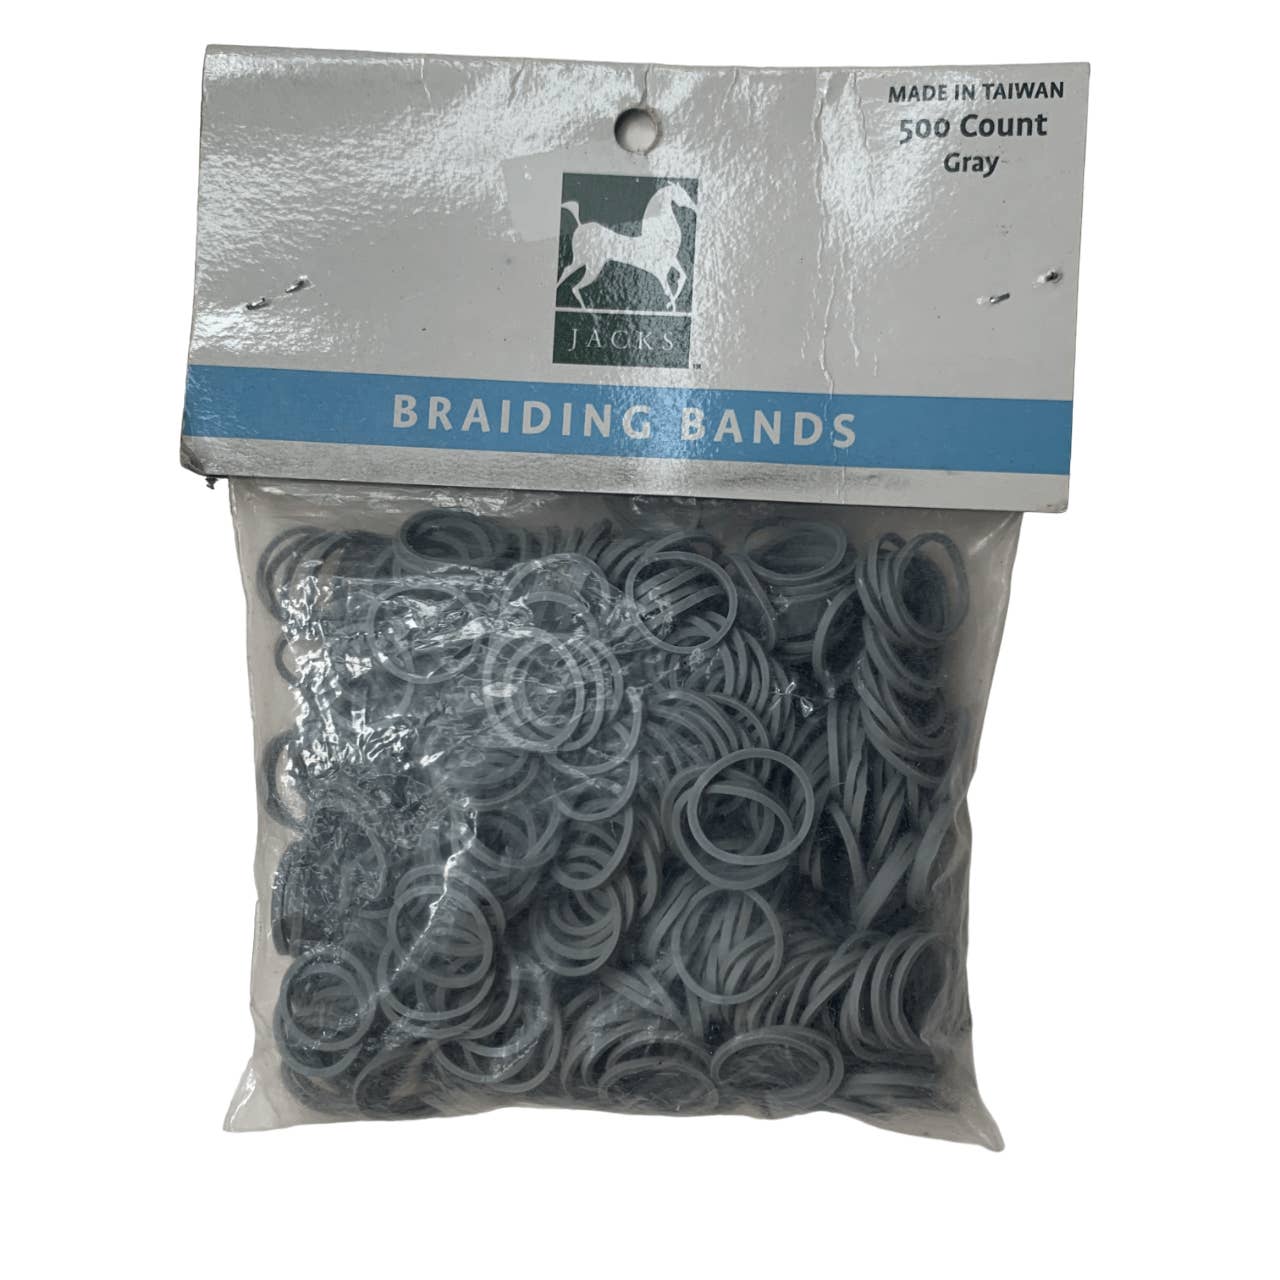 Jacks Braiding Rubber Bands in Gray - 500 Count